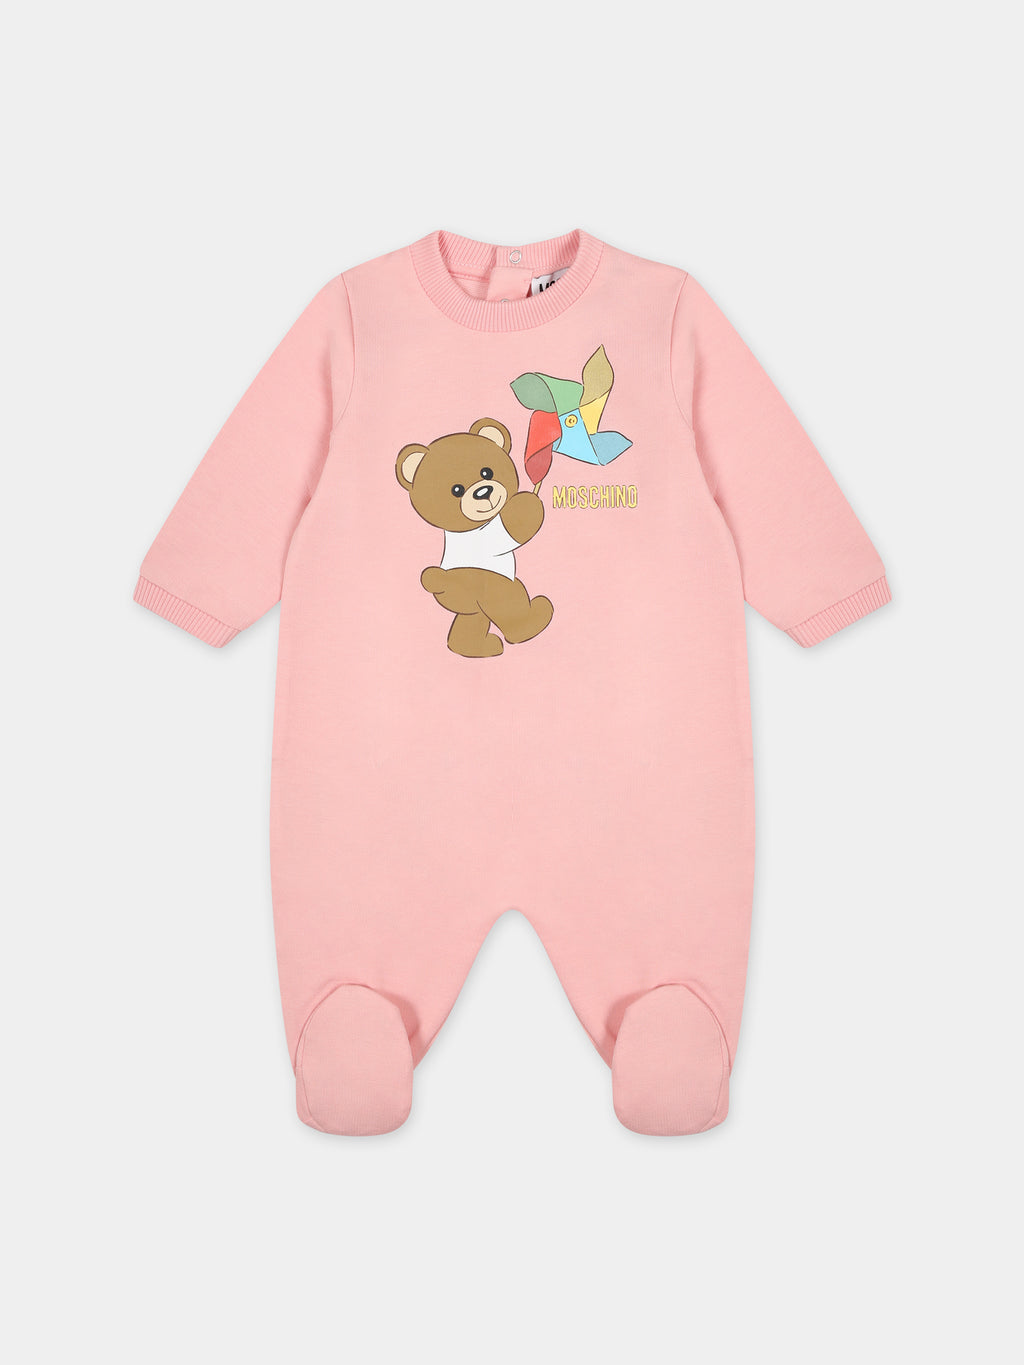 Pink bodysuit for baby girl with Teddy Bear and multicolor pinwheel